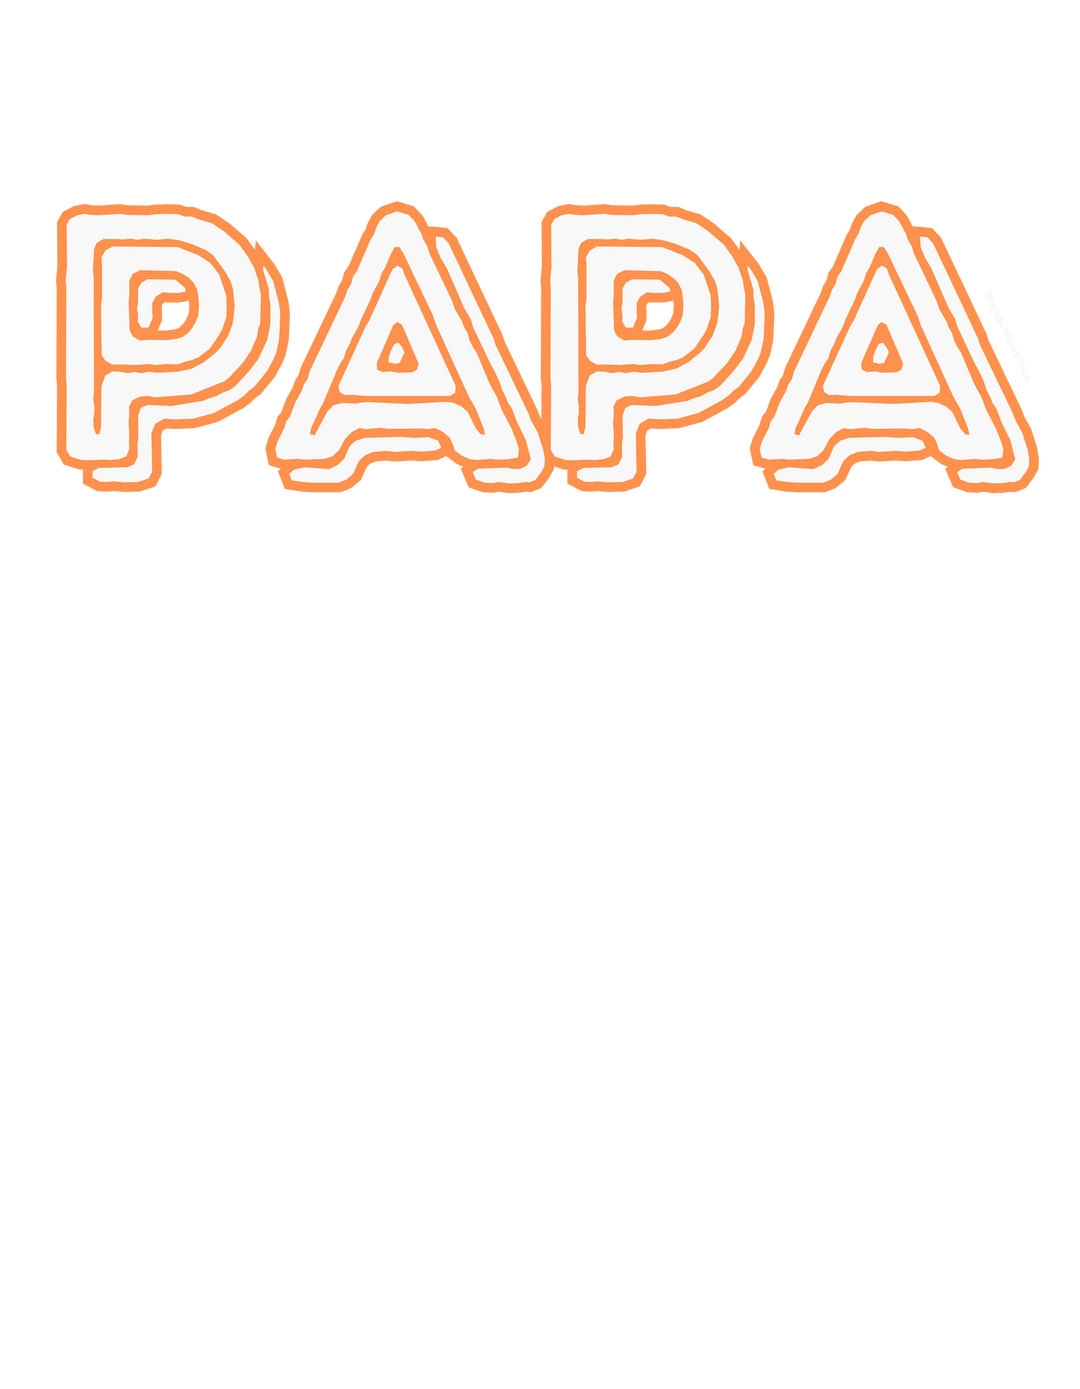 A cozy unisex Papa Hoodie in white and orange typography on a black background. Made of 50% cotton, 50% polyester blend, with a kangaroo pocket and matching drawstring. Ideal for chilly days.